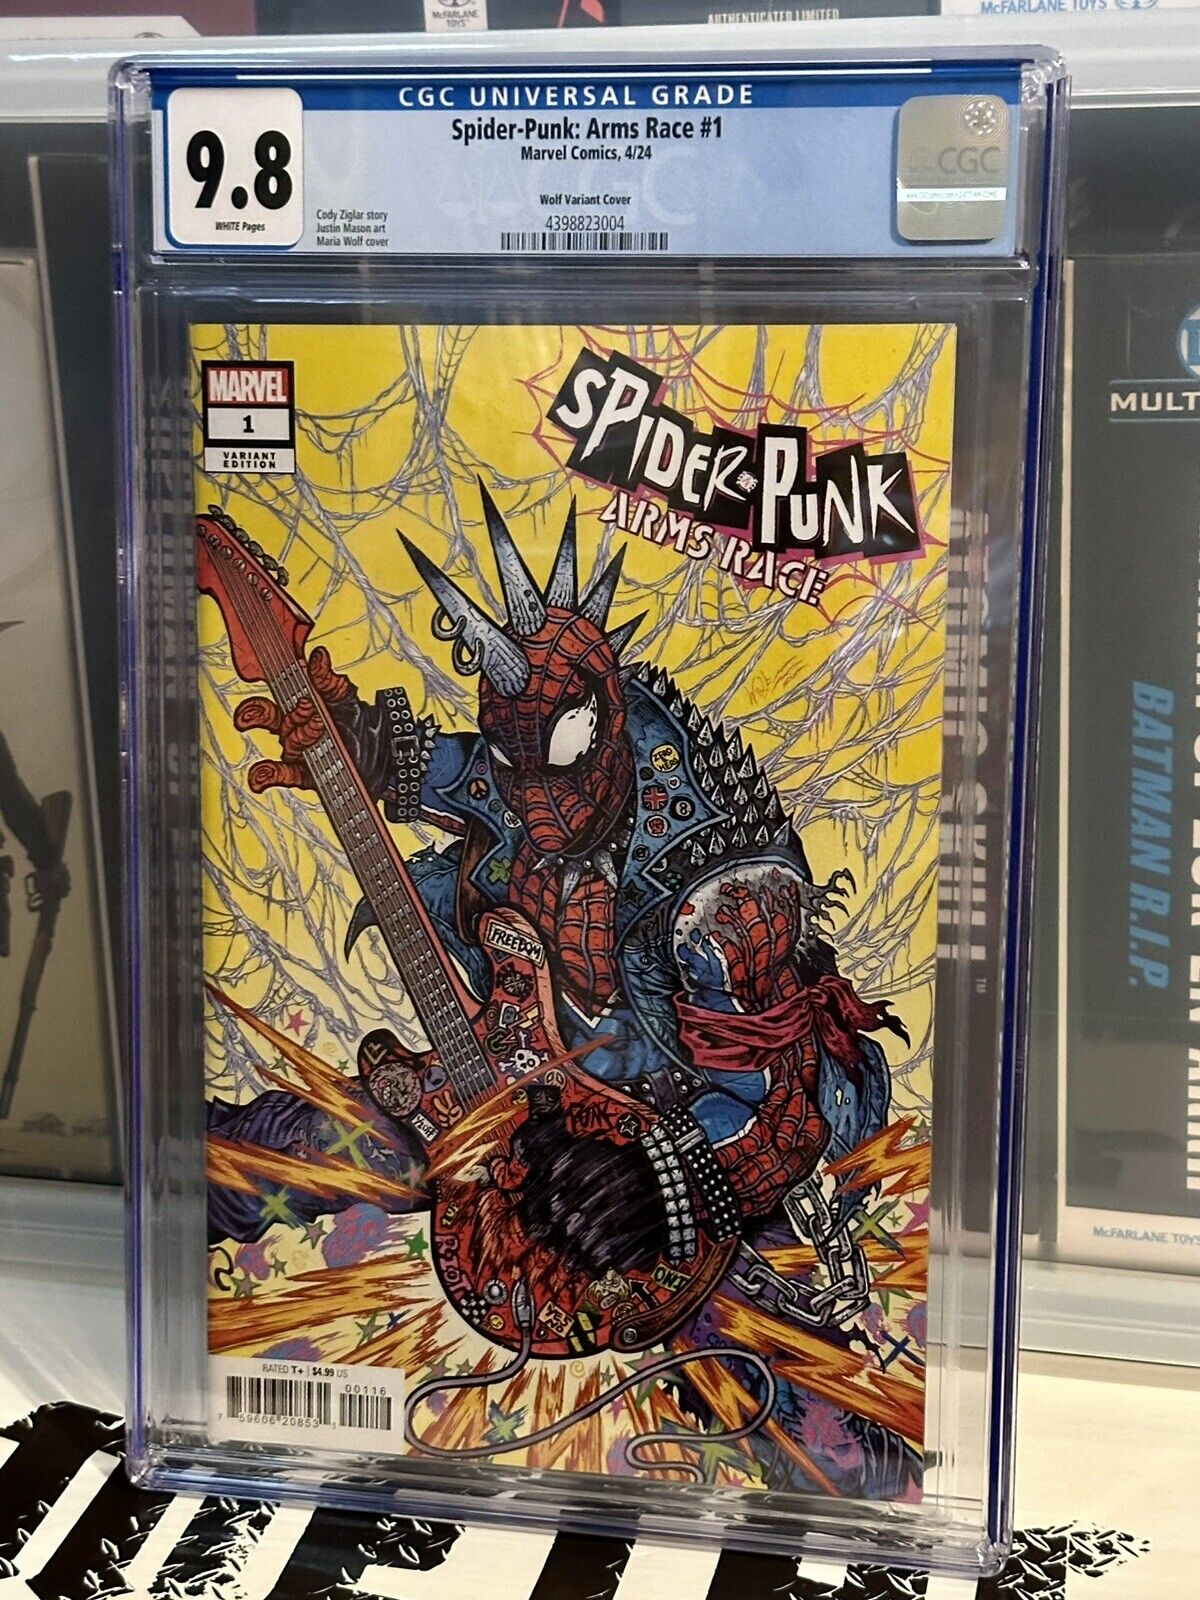 Spider-Punk Arms Race #1 CGC 1:25 Wolf Vest Patch Guitar Variant Cover Marvel MT